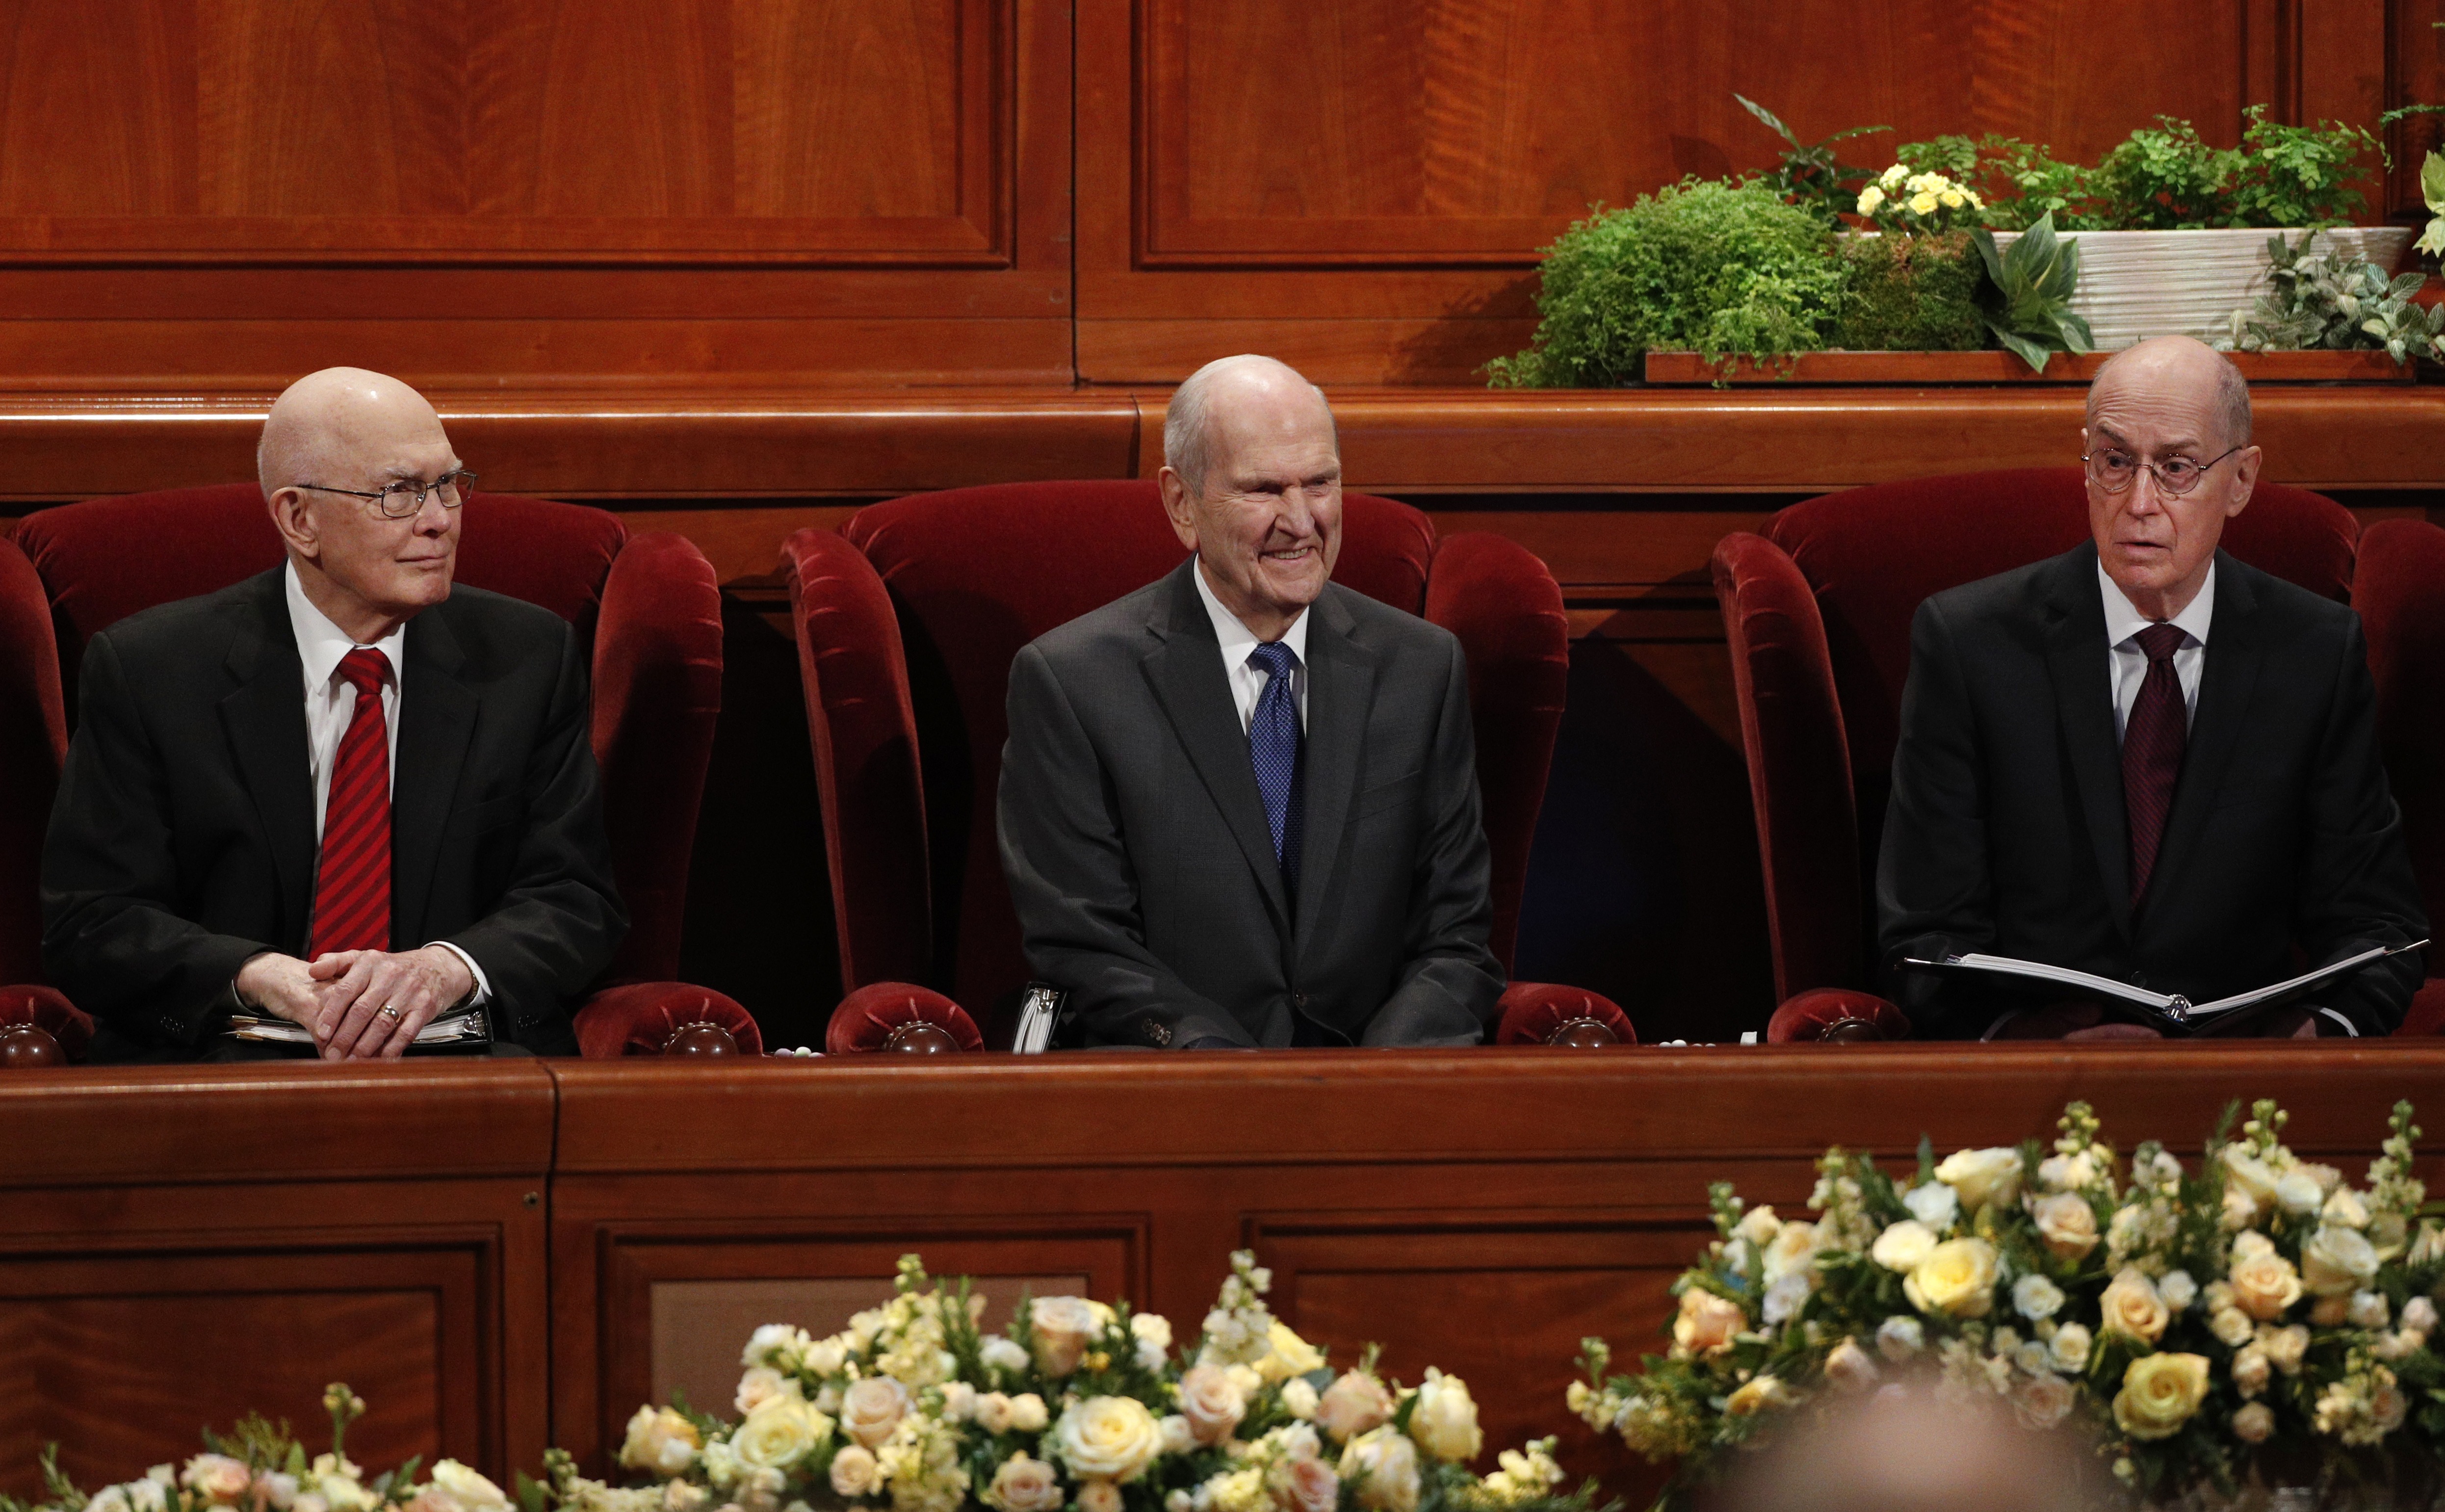 SALT LAKE CITY, UT - MARCH 31: Then President Russell M. Nelson (C), 1st Councilor Dallin H. Oaks, (L) and 2nd Councilor Henry B. Eyring (R), wait for the start of the first session of the 188th Annual General Conference of the Church of Jesus Christ of Latter-Day Saints on March 31, 2018 in Salt Lake City, Utah. (Photo by George Frey/Getty Images)